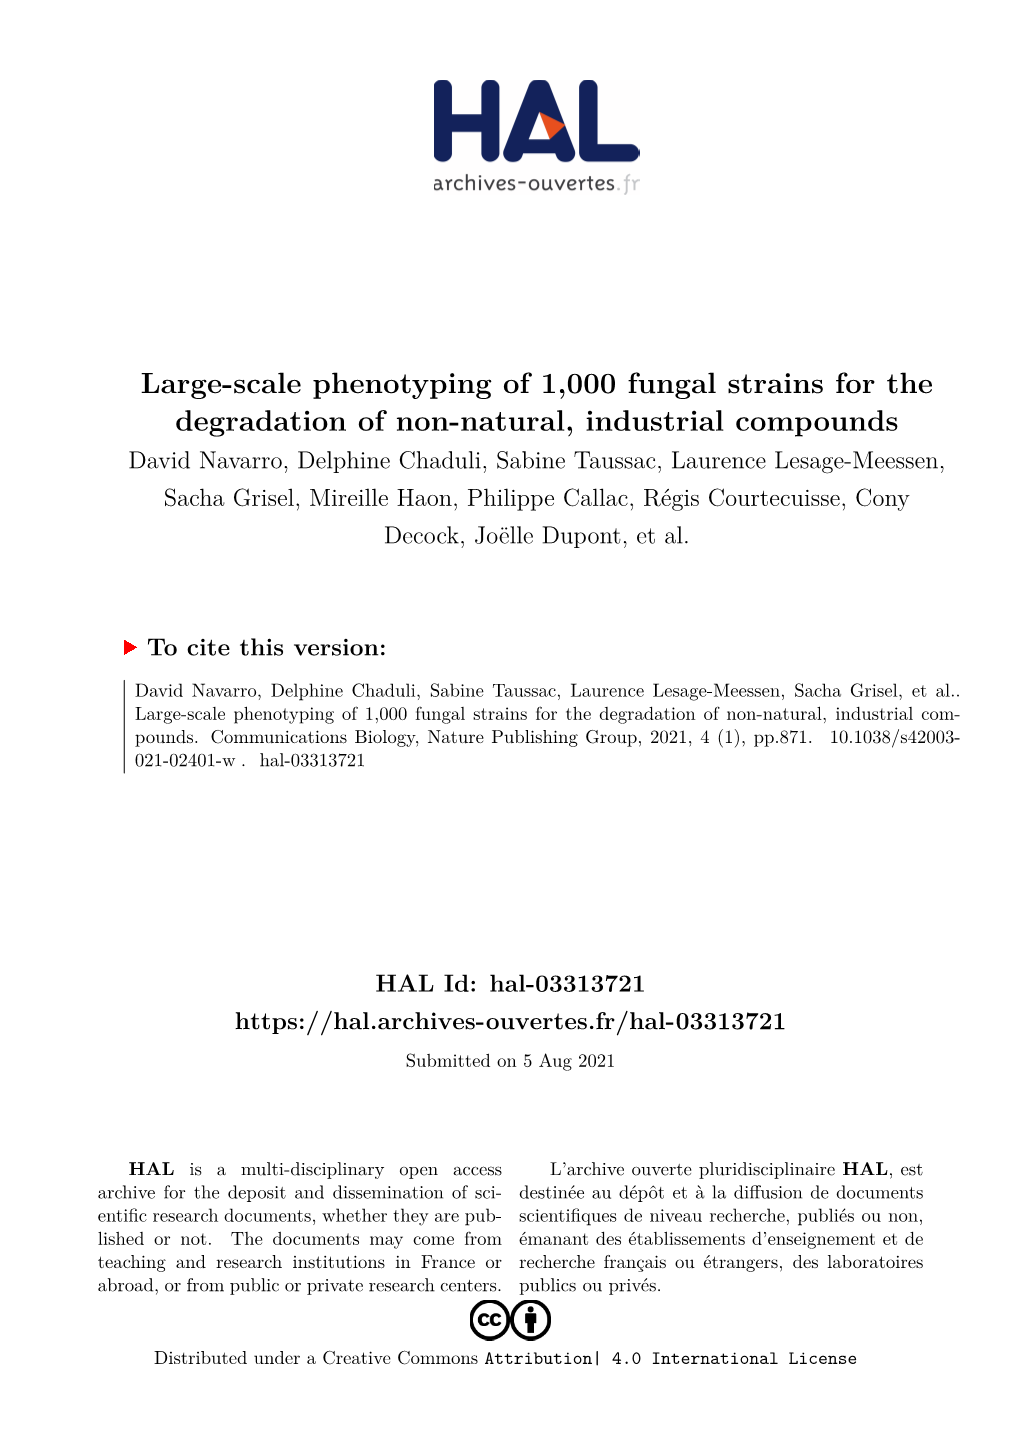 Large-Scale Phenotyping of 1,000 Fungal Strains for the Degradation Of